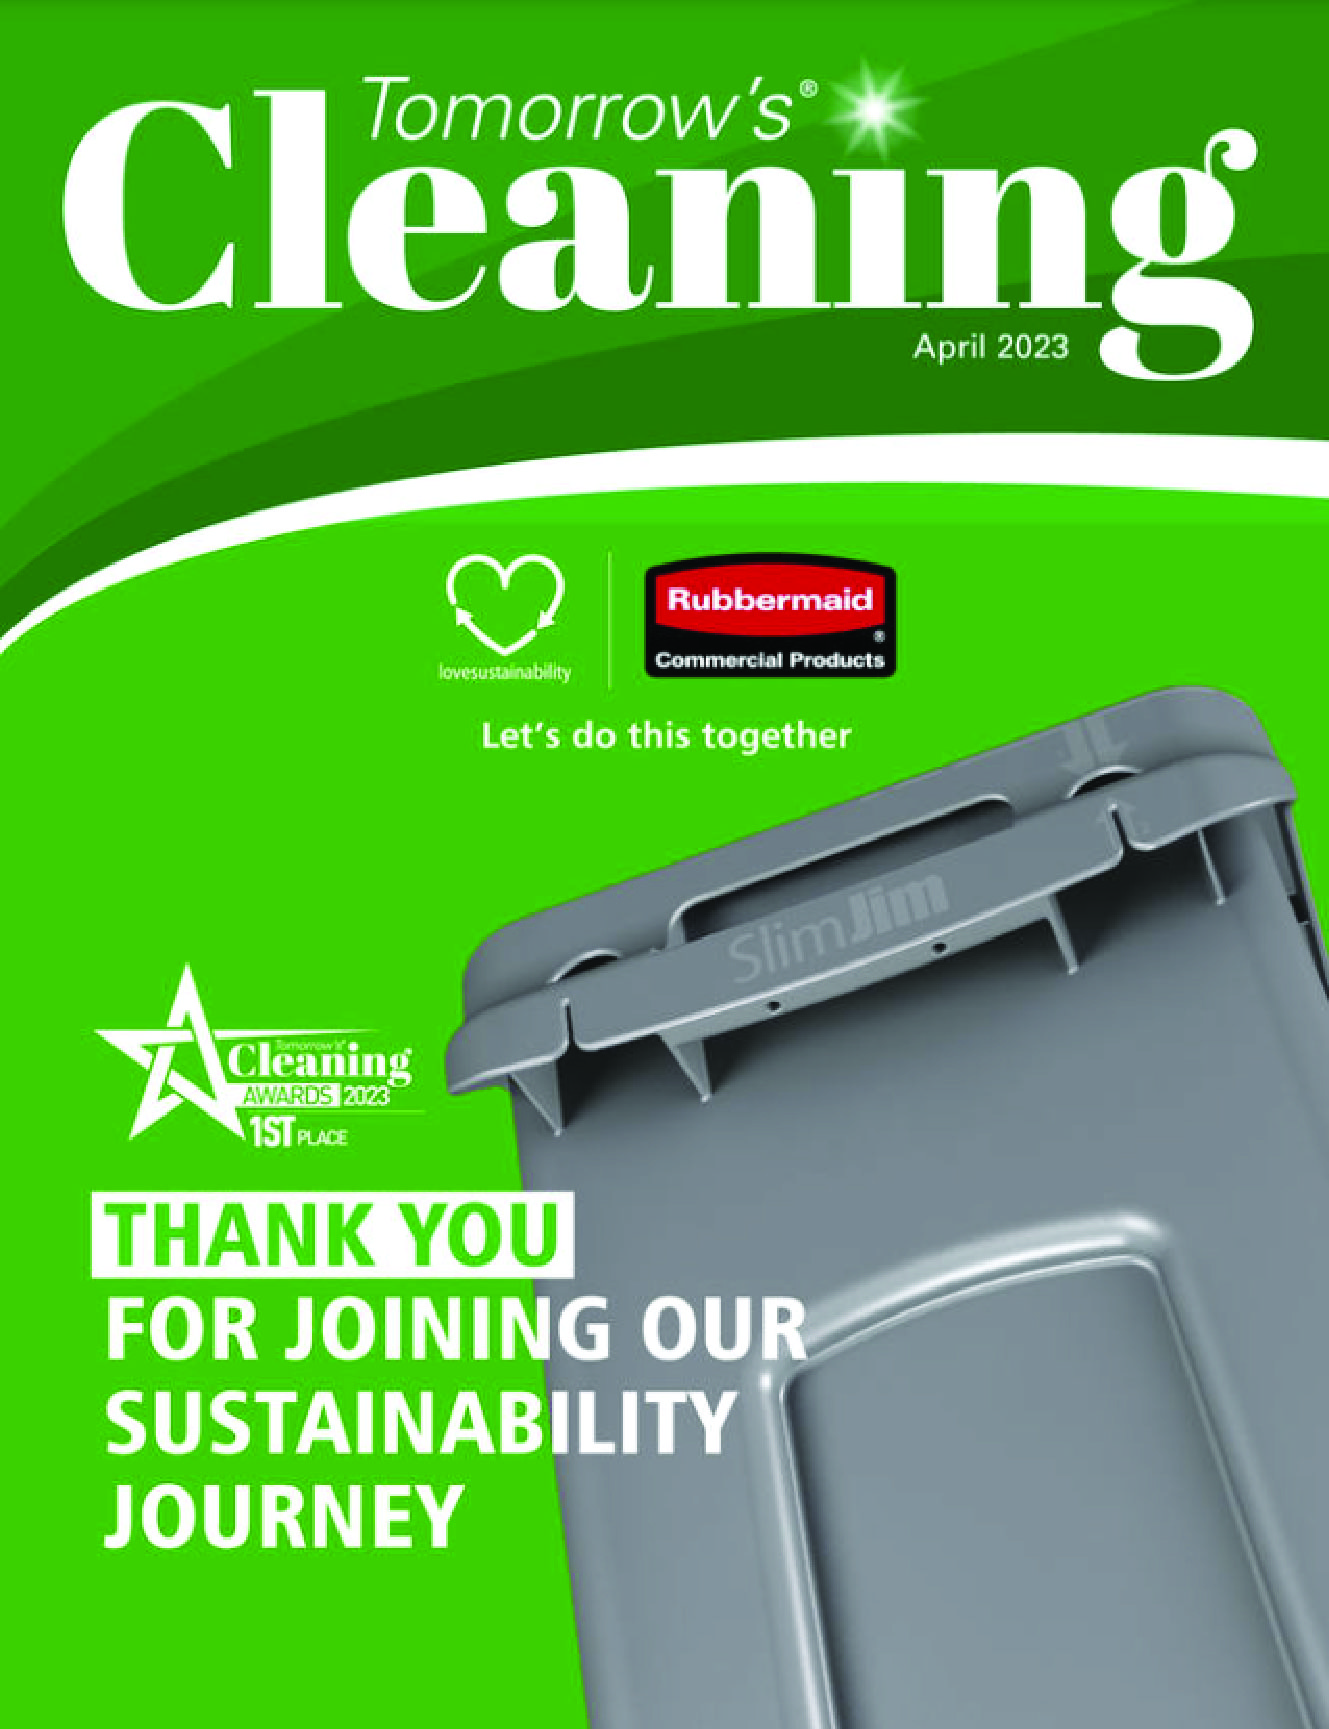 We are featured in Tomorrows Cleaning April 2023 sustainability edition magazine! 